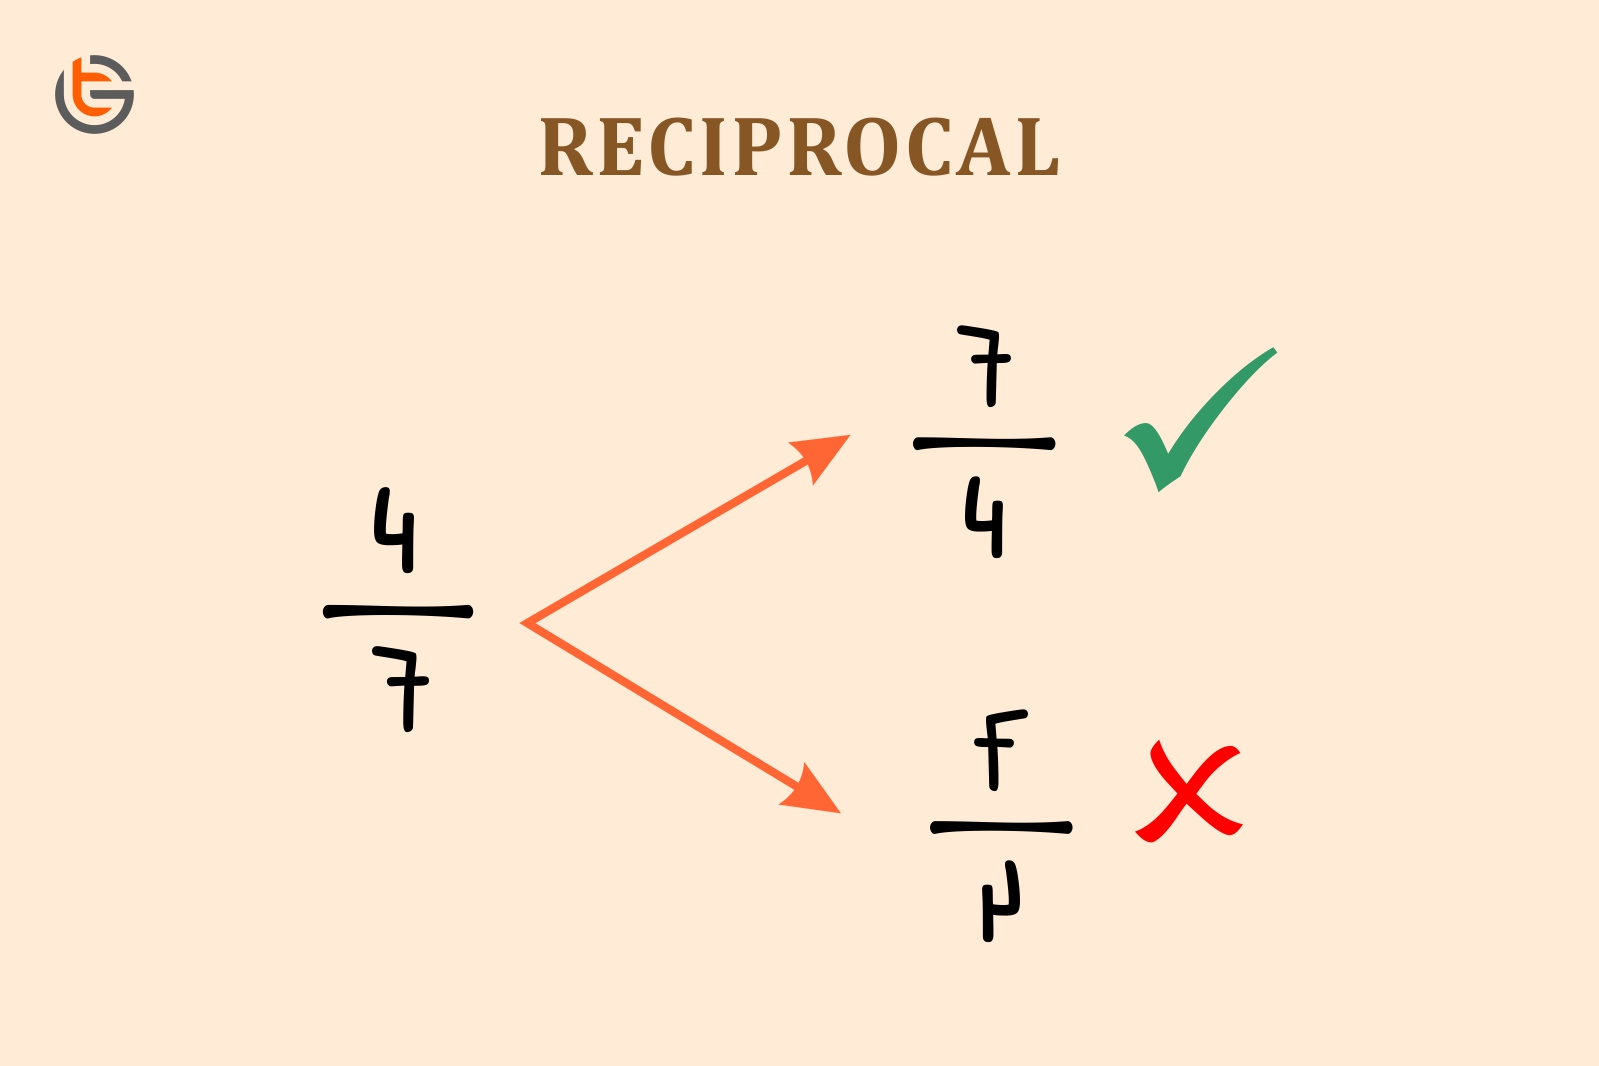 What is a reciprocal in math?